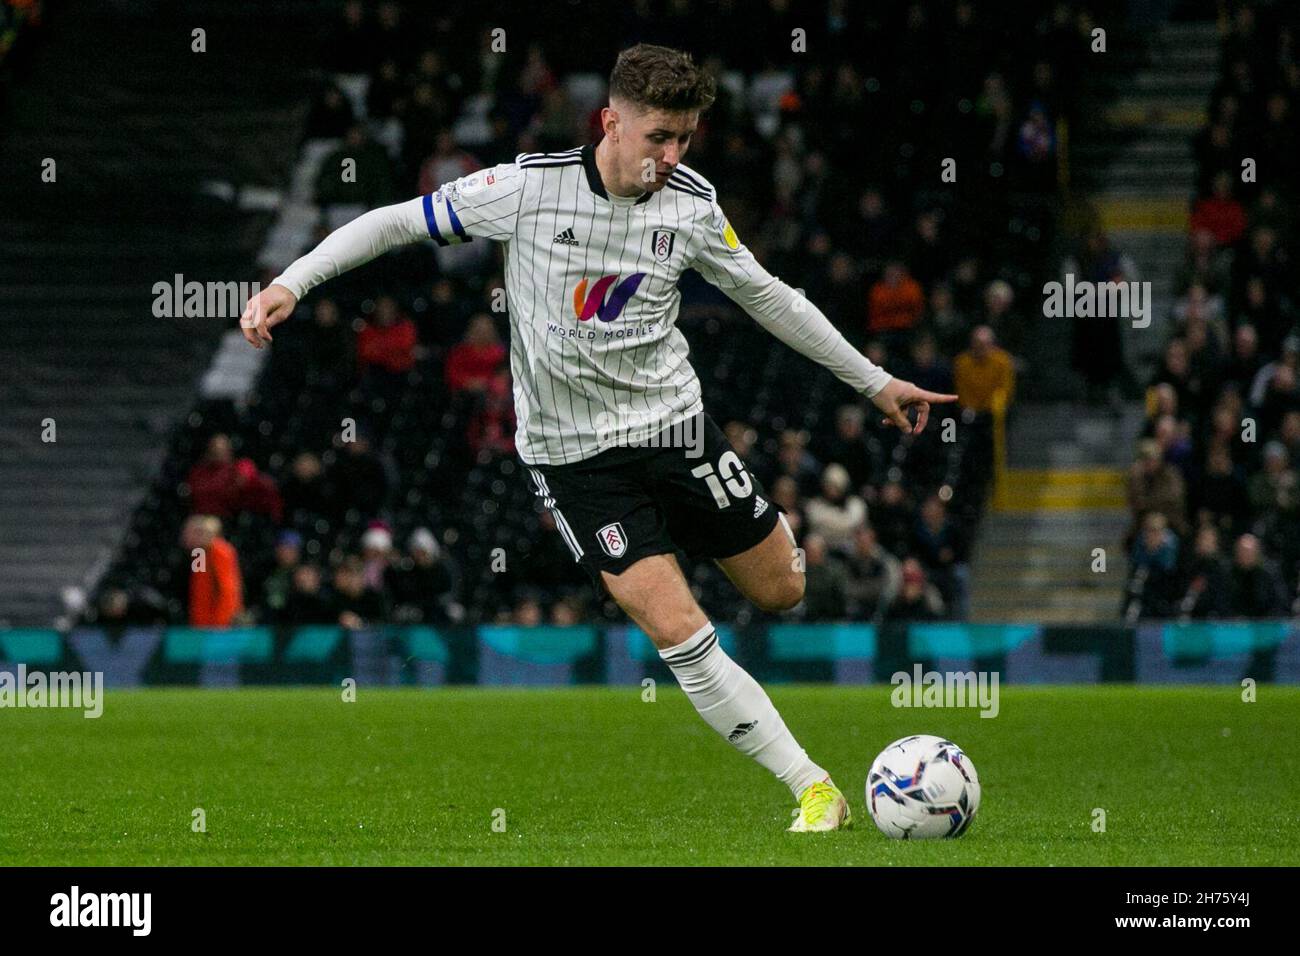 Tom Cairney High Resolution Stock Photography and Images - Alamy